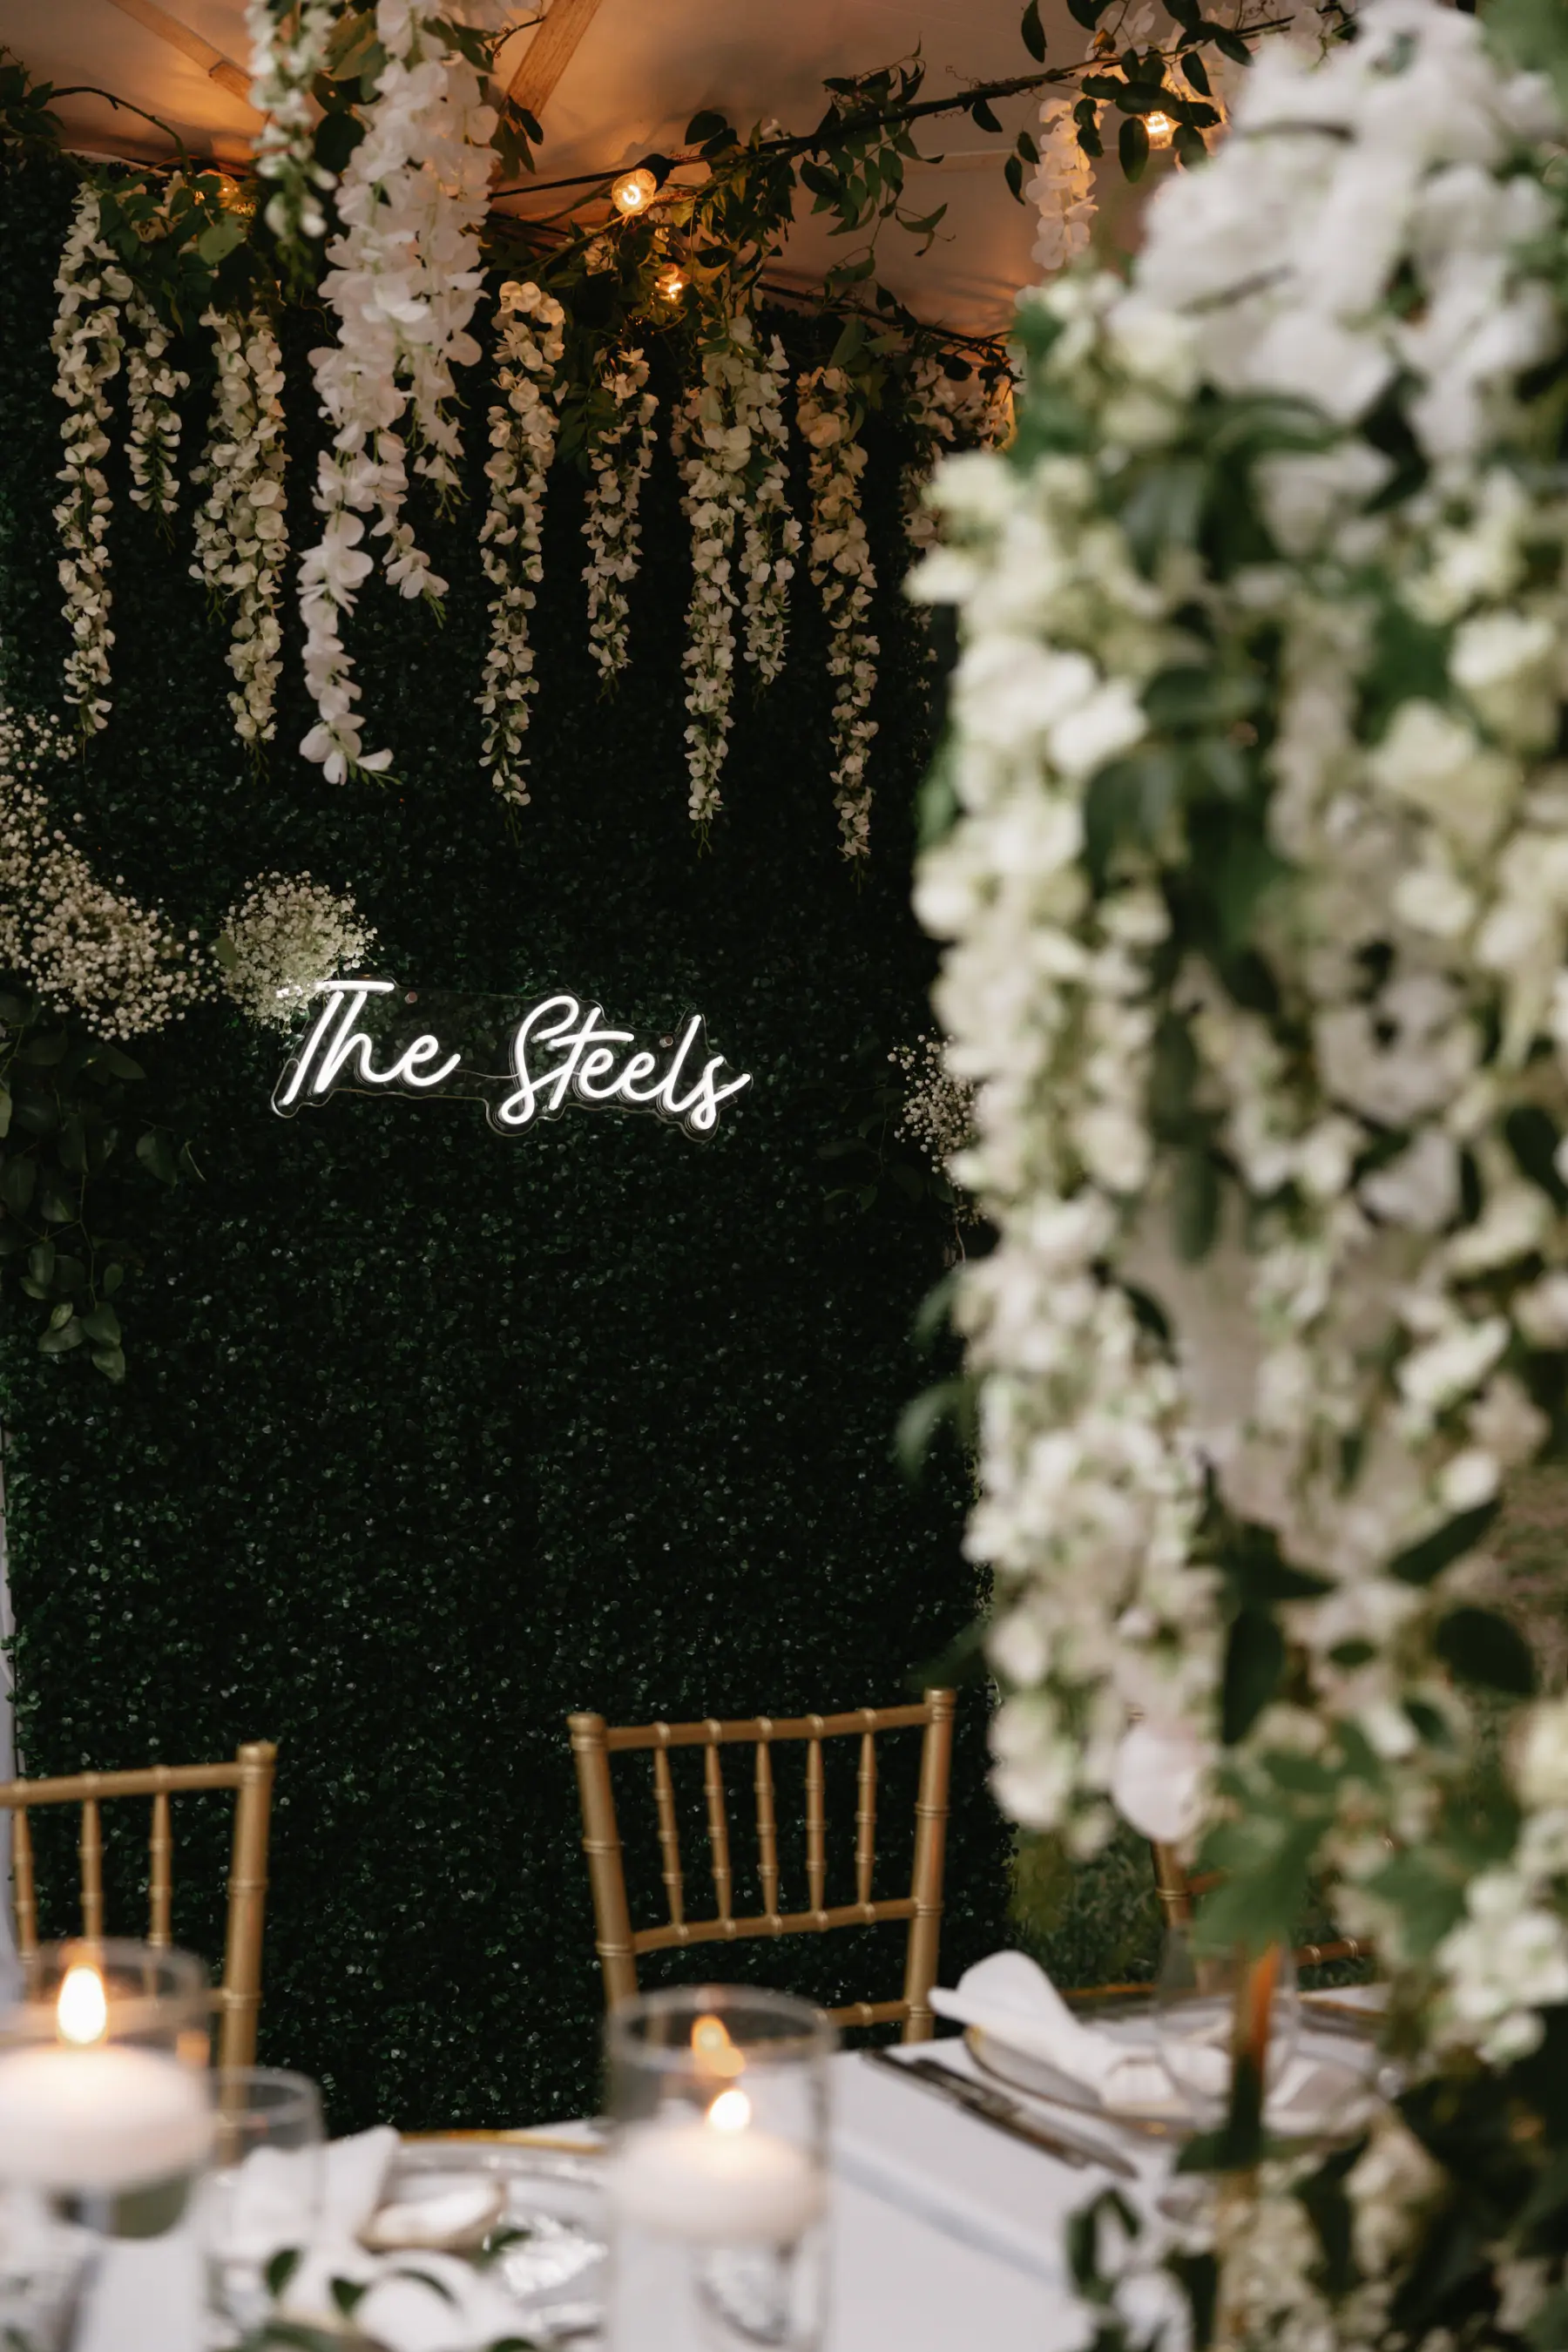 Classic Wedding Reception Sweetheart Table Decor Inspiration | Greenery Backdrop with White Cascading Wisteria with Neon Sign | Tampa Bay Florist Beneva Florals